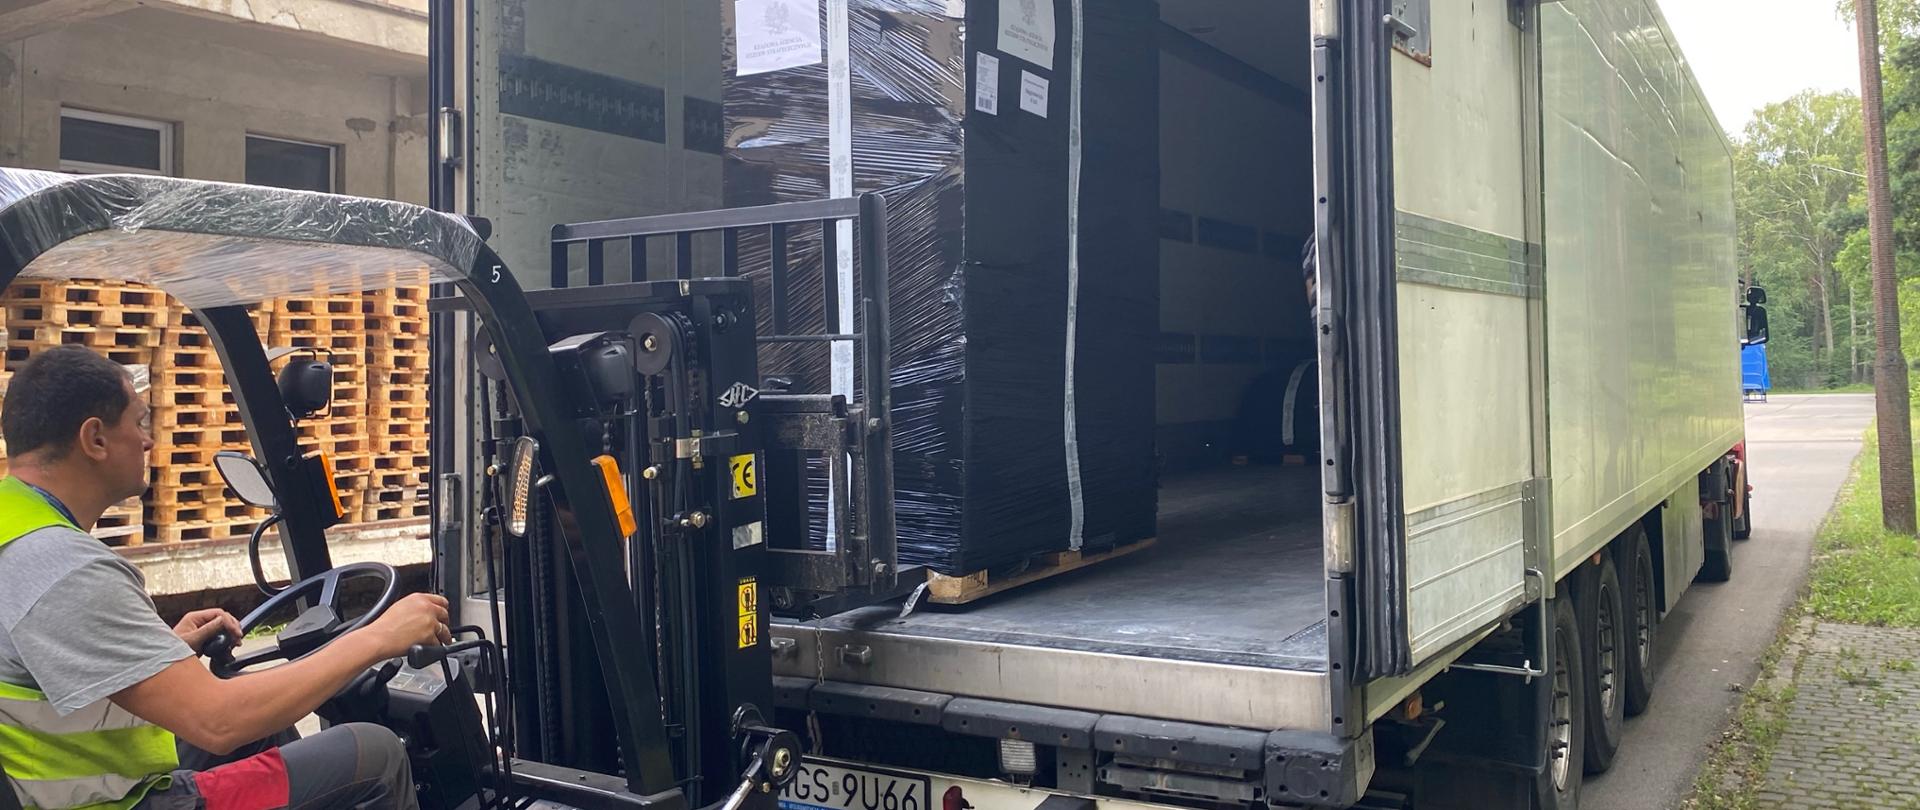 A man places the package in the truck with a forklift